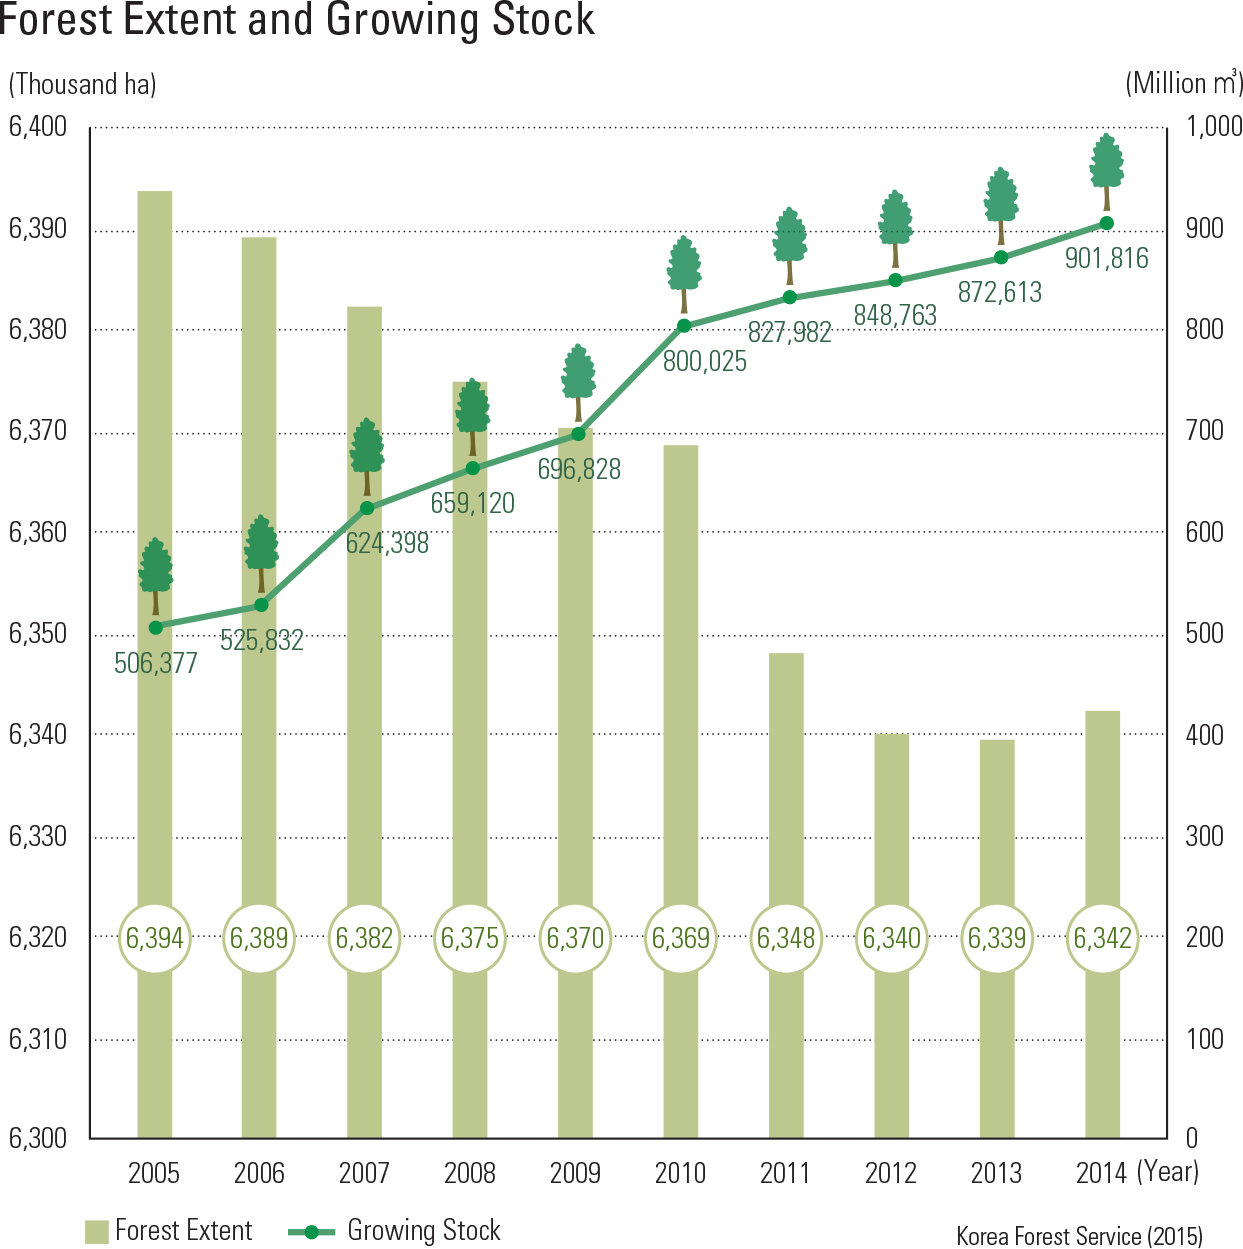 Forest Extend and Growing Stock<p class="oz_zoom" zimg="http://imagedata.cafe24.com/us_2/us2_75-3_2.jpg"><span style="font-family:Nanum Myeongjo;"><span style="font-size:18px;"><span class="label label-danger">UPDATE DATA</span></span></p>